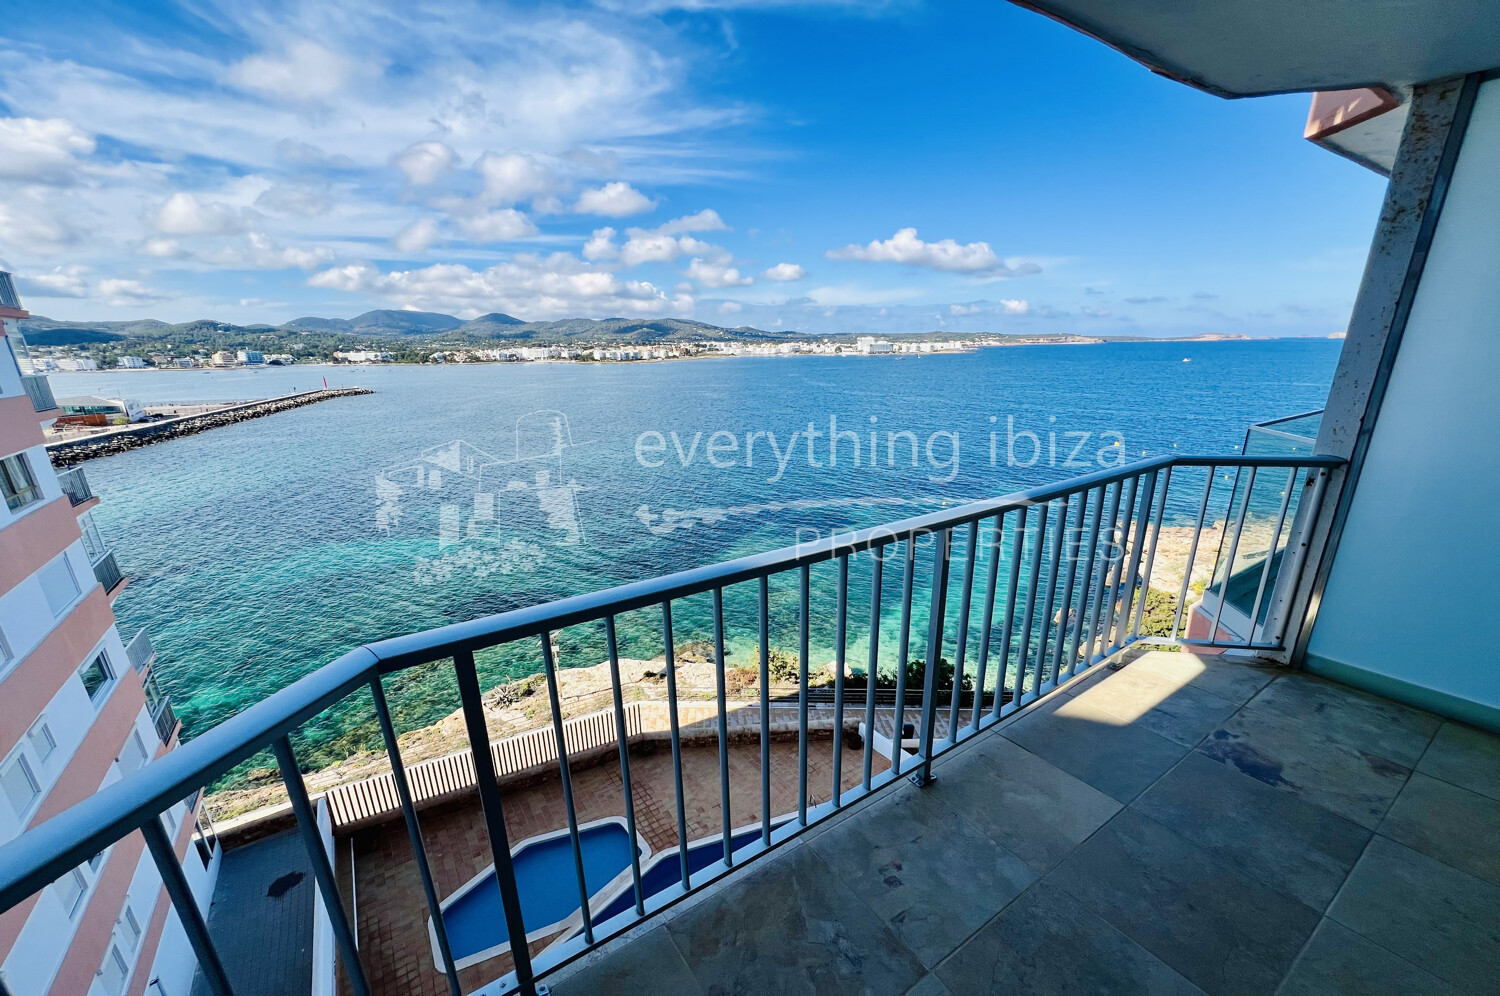 Contemporary Modern 2 Bed Apartment with Super Sea, Bay & Sunset Views, ref. 1705, for sale in Ibiza by everything ibiza Properties